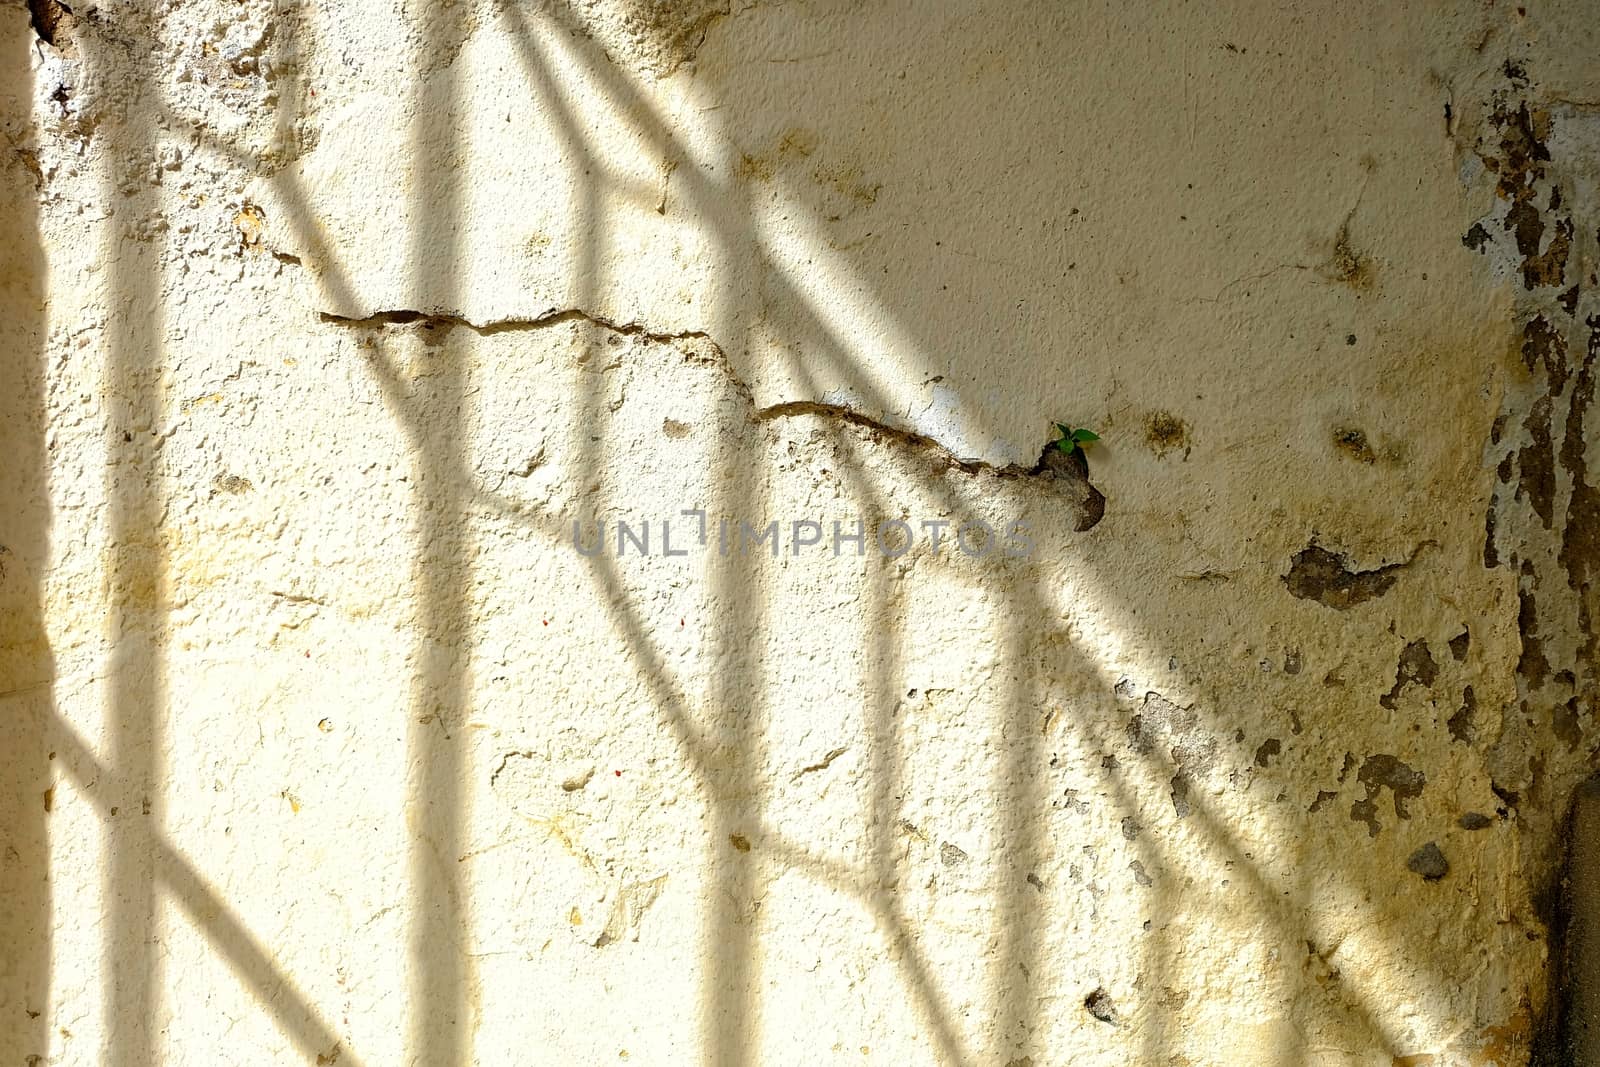 Shadow of Fence on Grunge Concrete Wall.